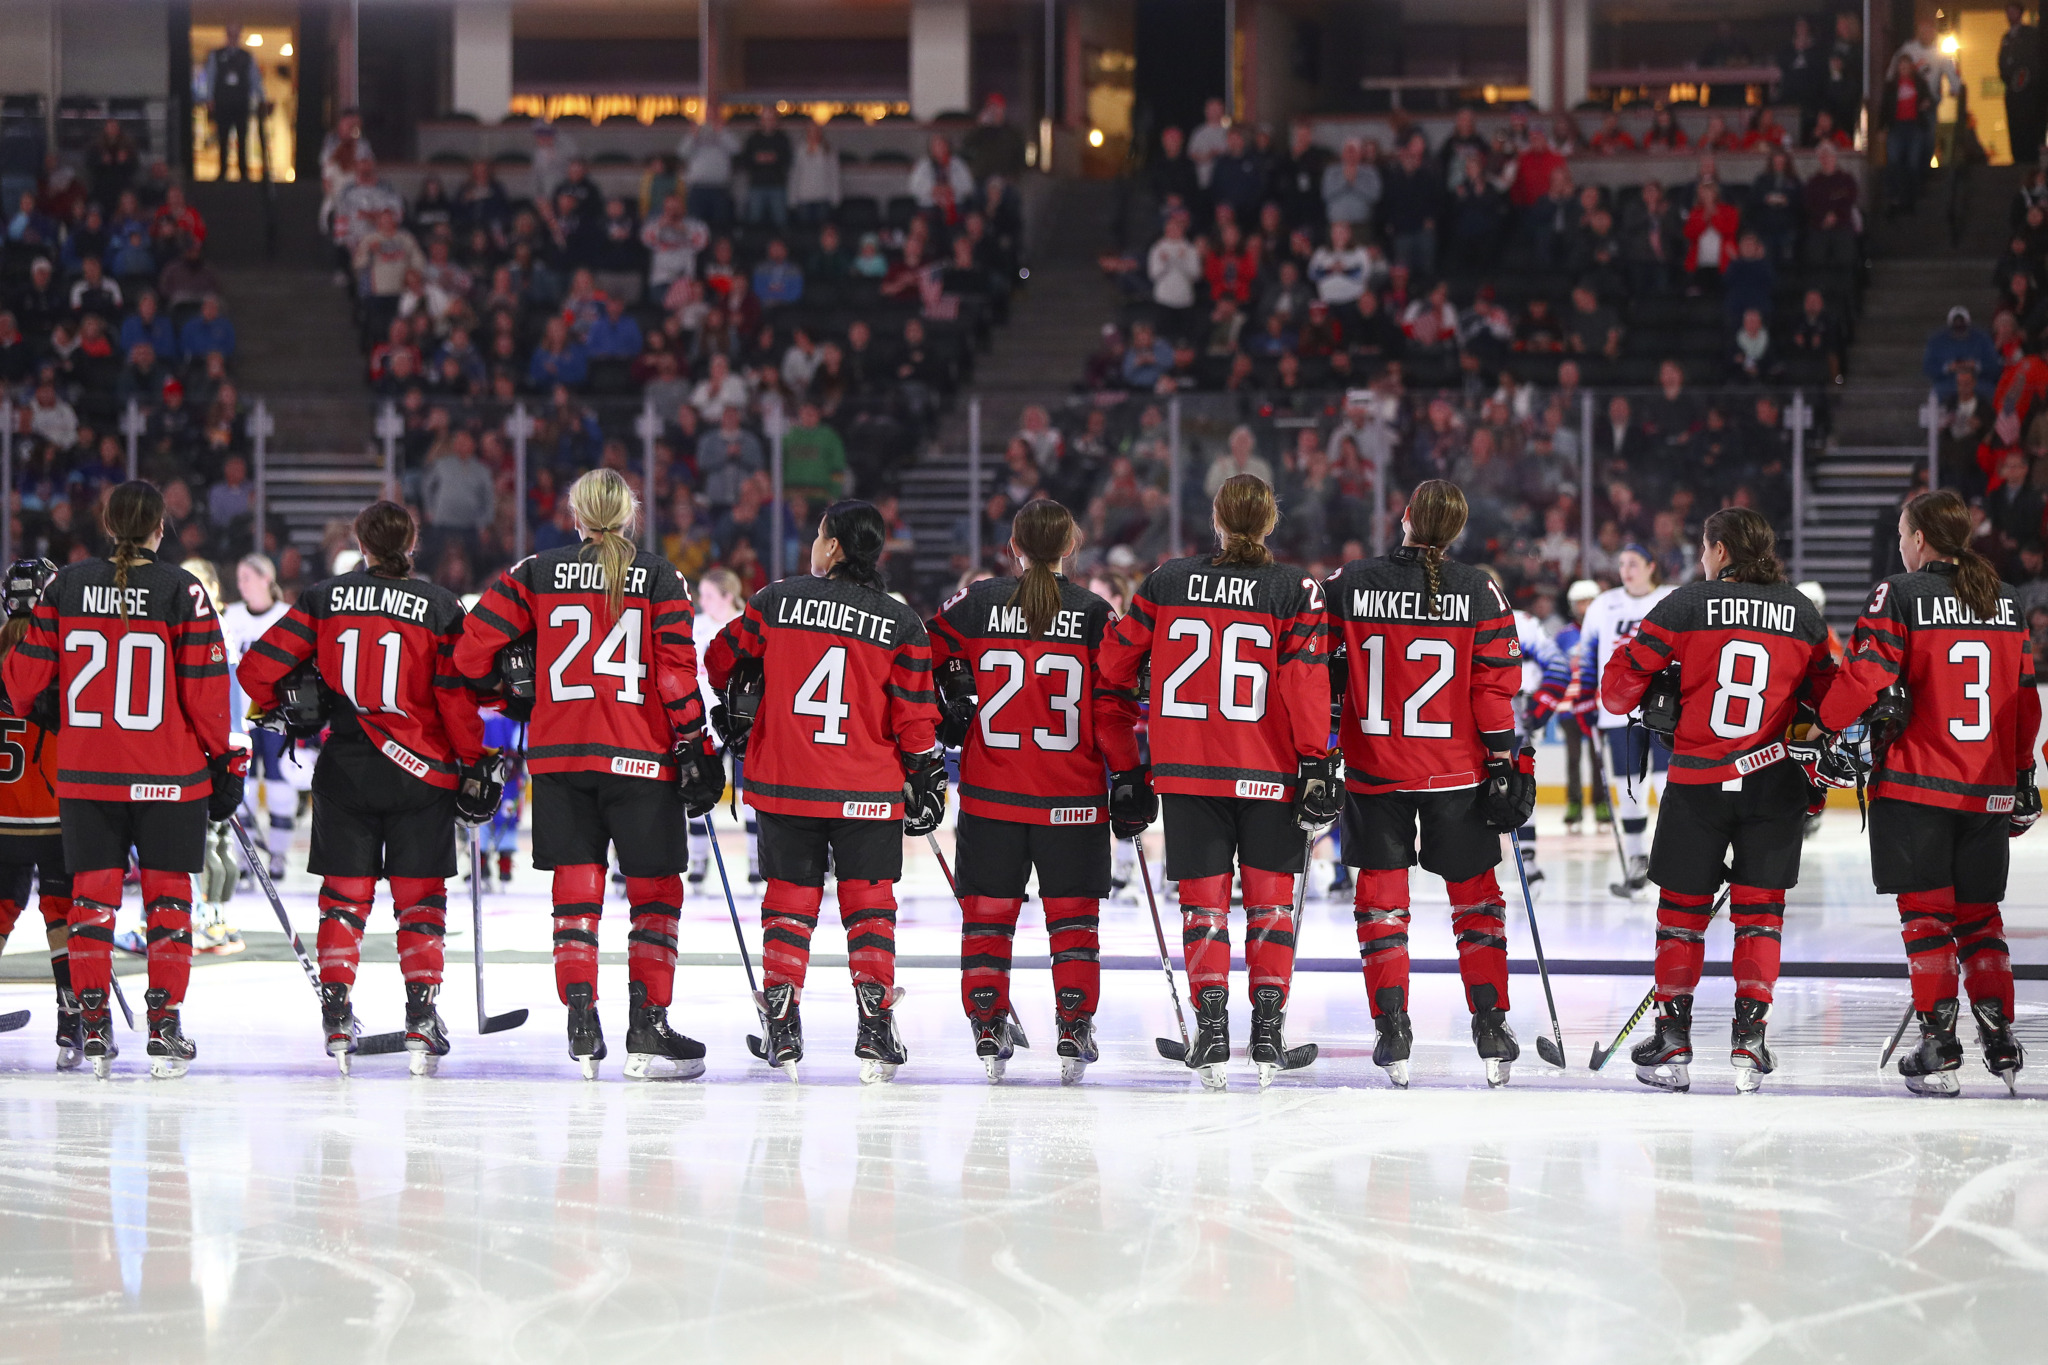 Live from the Calgary Bubble, Complete Coverage of the 2021 IIHF WOMENS WORLD CHAMPIONSHIP Begins August 20 on TSN